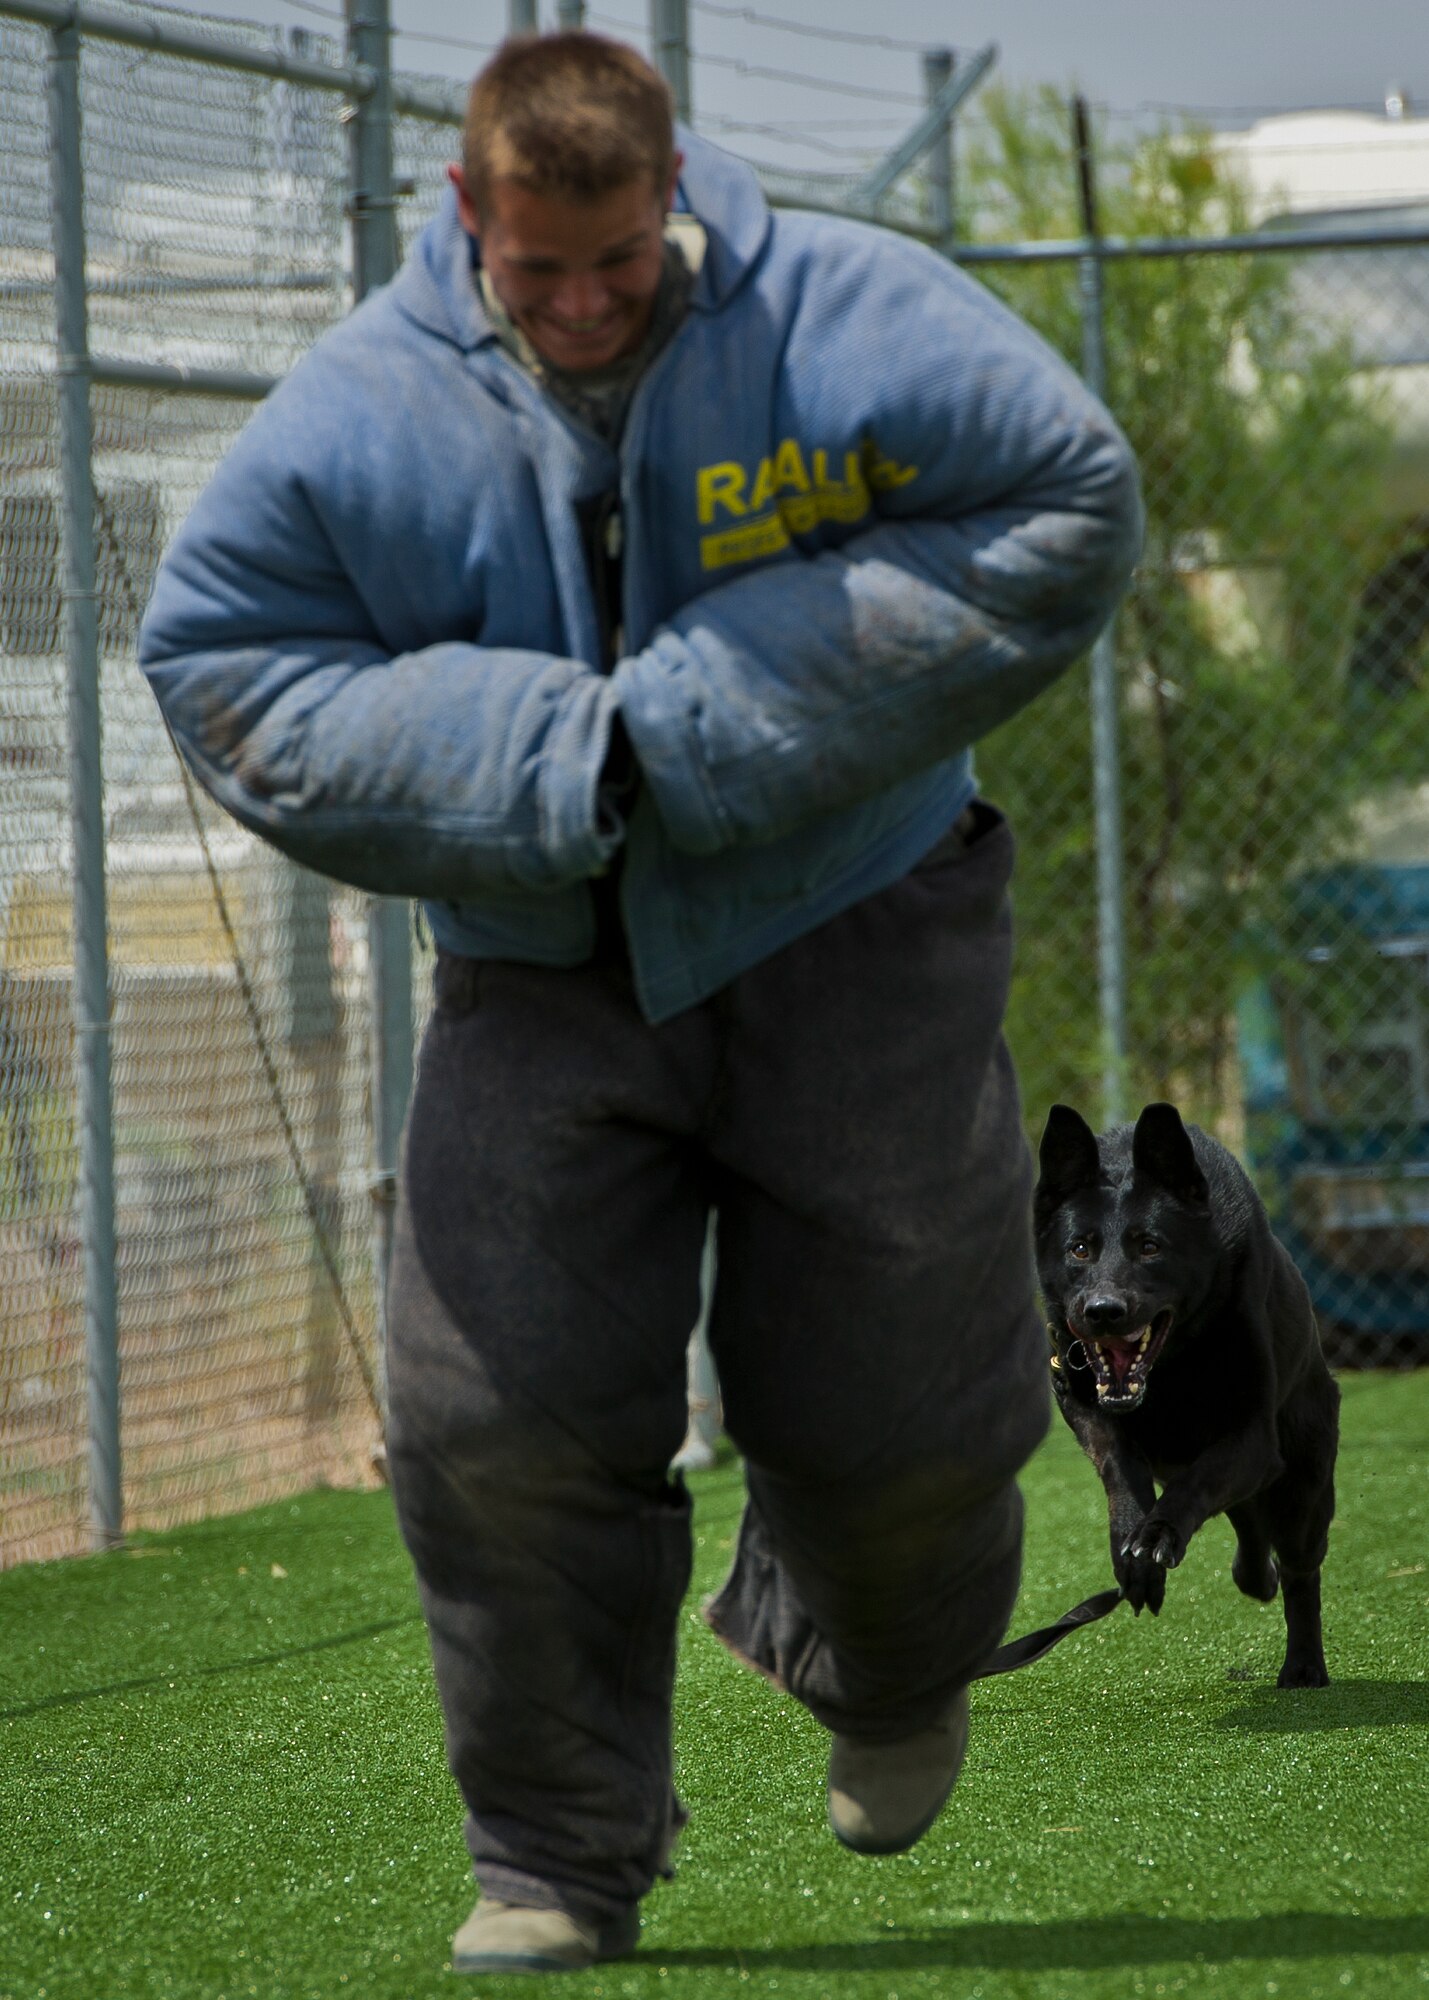 Andy Alexaitis, U.S. Air Force Academy cadet, plays the decoy for Military Working Dog Boby during aggression training at Holloman Air Force Base, N.M., June 28. The 49th Security Forces Squadron gave the cadets insight into the daily duties of being an MWD handler.  The cadets spent two weeks at Holloman to gain insight on their career options after the academy. (U.S. Air Force photo by Airman 1st Class Aaron Montoya/Released)